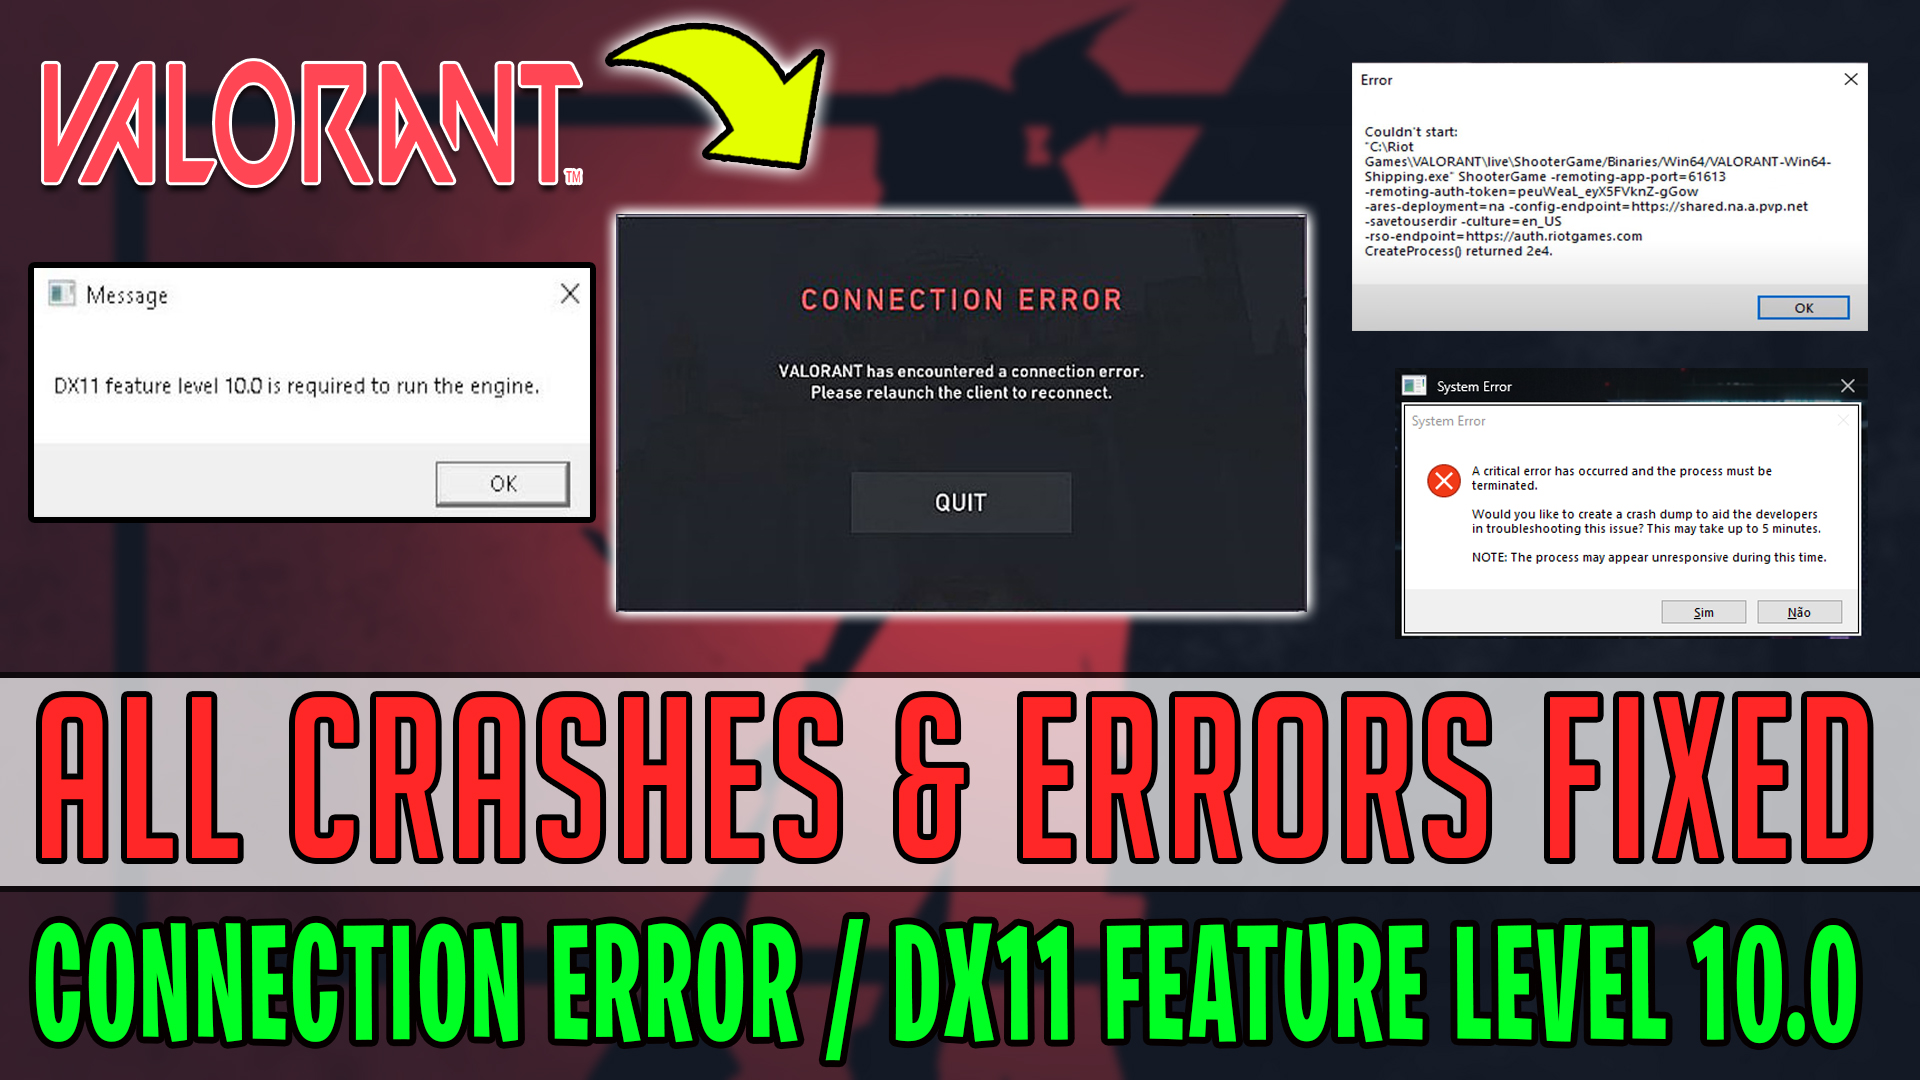 Dx11 feature 10.0. Dx11 feature 10.0 is required to Run the engine. Валорант dx11 feature Level 10.0 is required to Run the engine. DX 11 feature Level 10.0 is required Run the engine решение. Critical Error has occurred valorant.